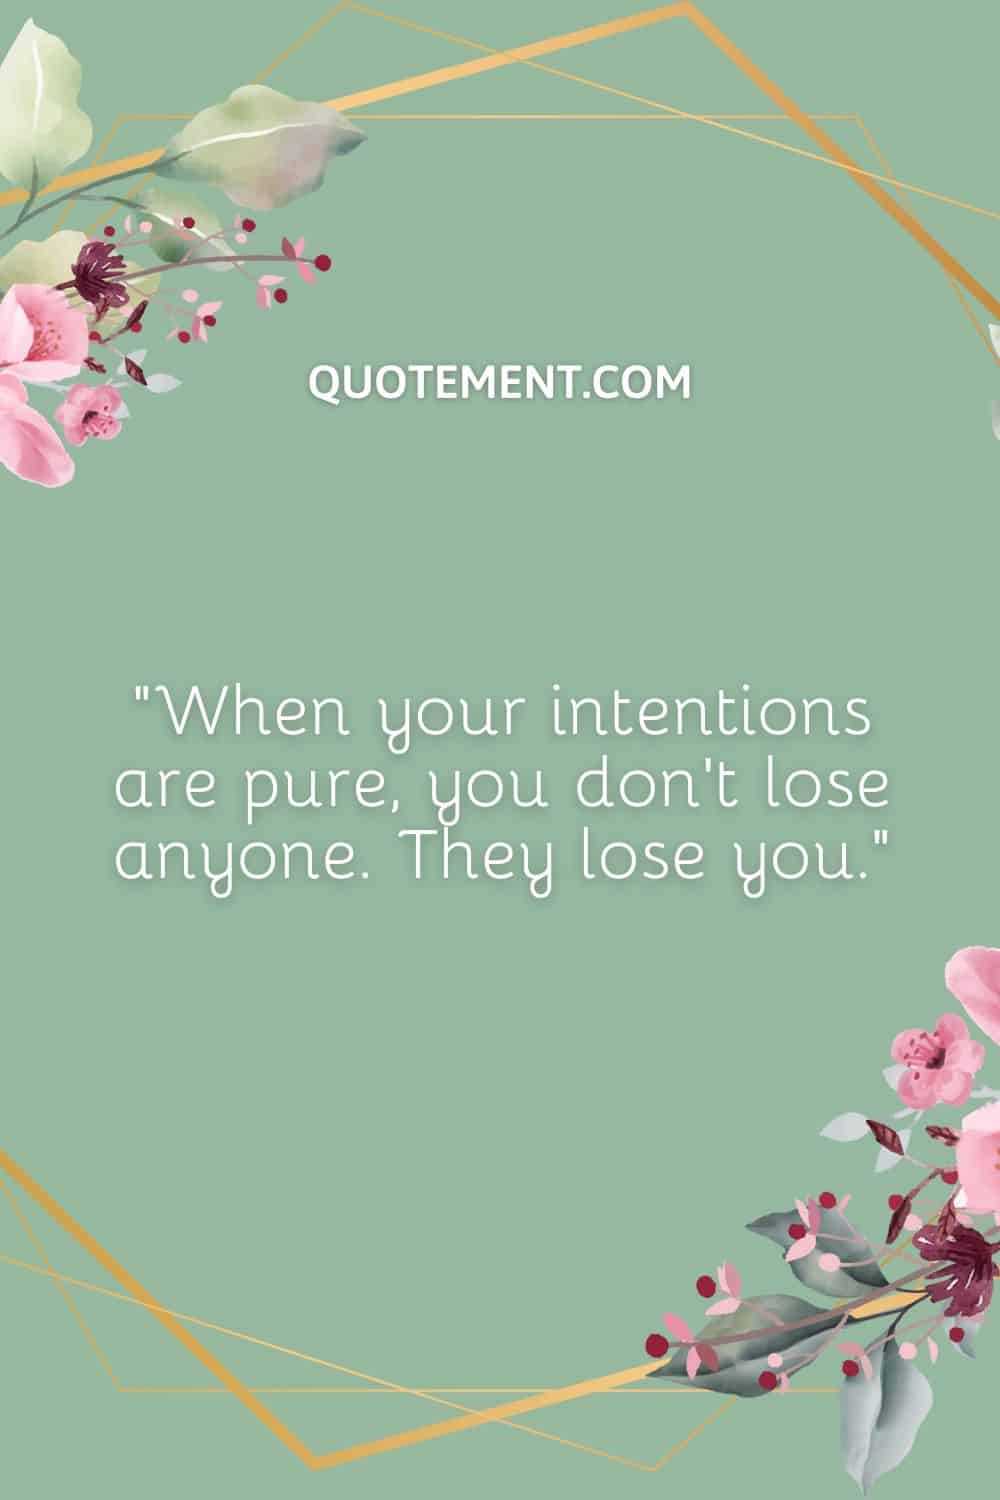 When your intentions are pure, you don’t lose anyone